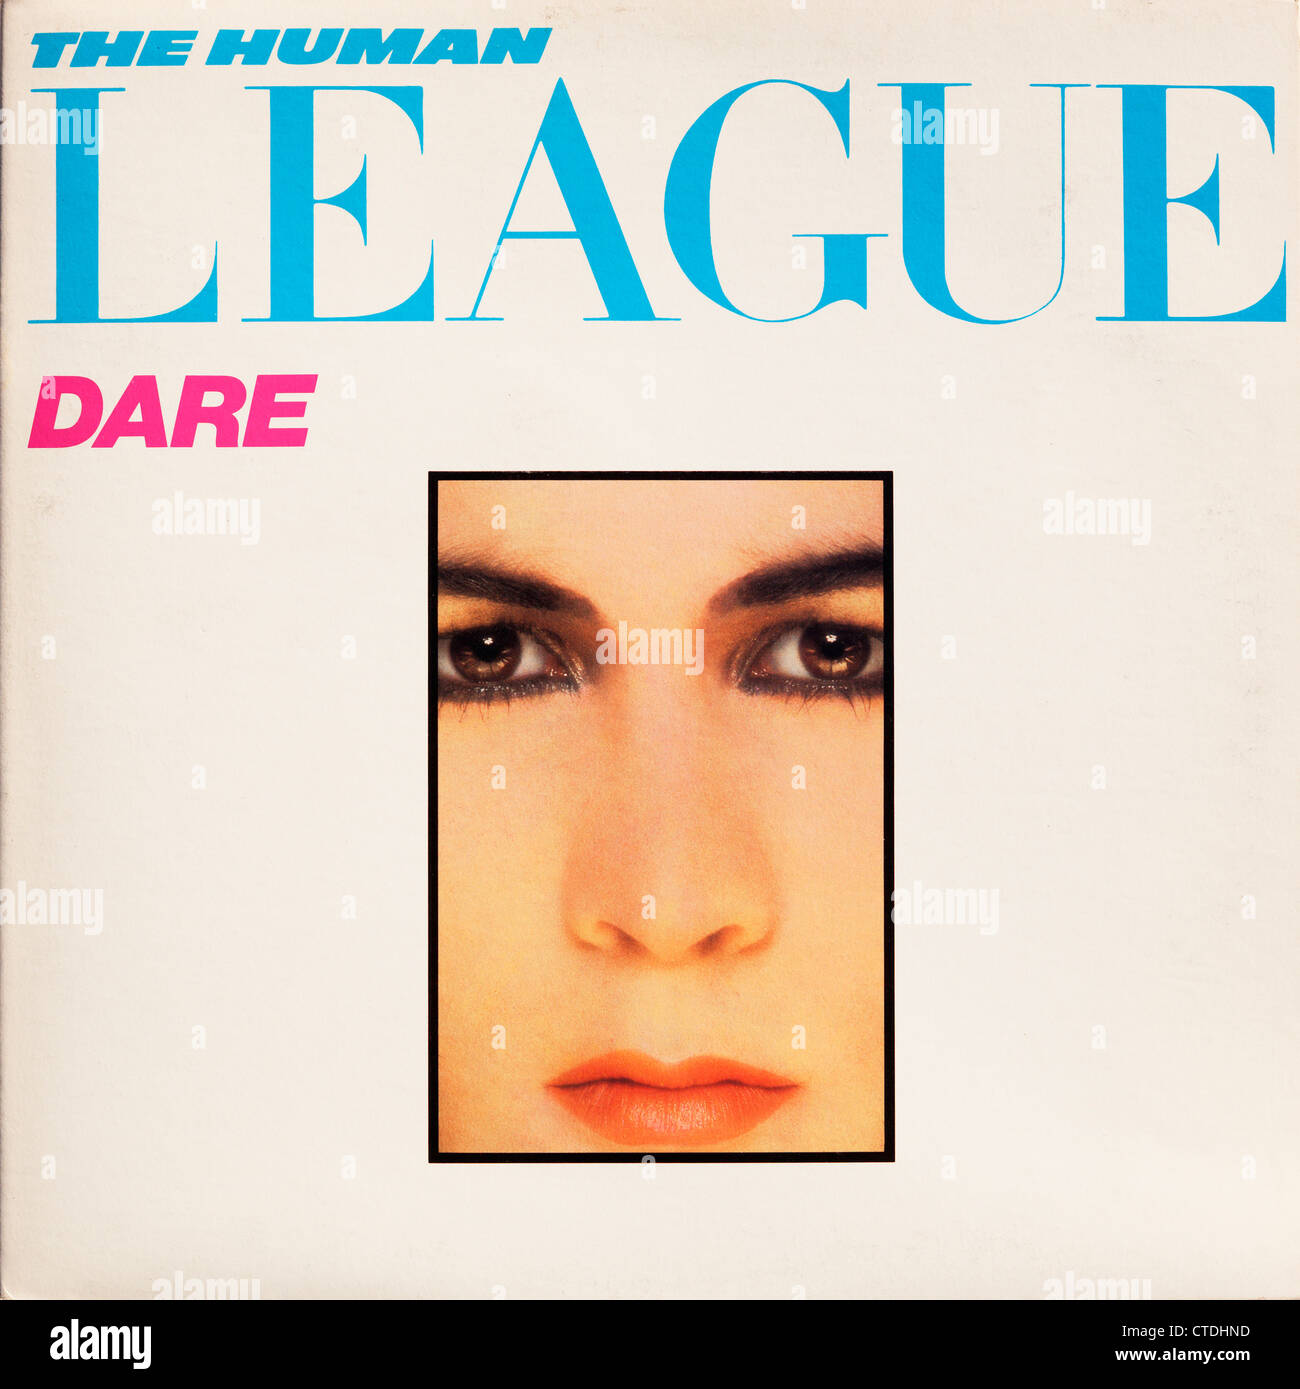 Vinyl LP record album cover from The Human League - Dare.  Editorial use only.  Commercial use prohibited. Stock Photo